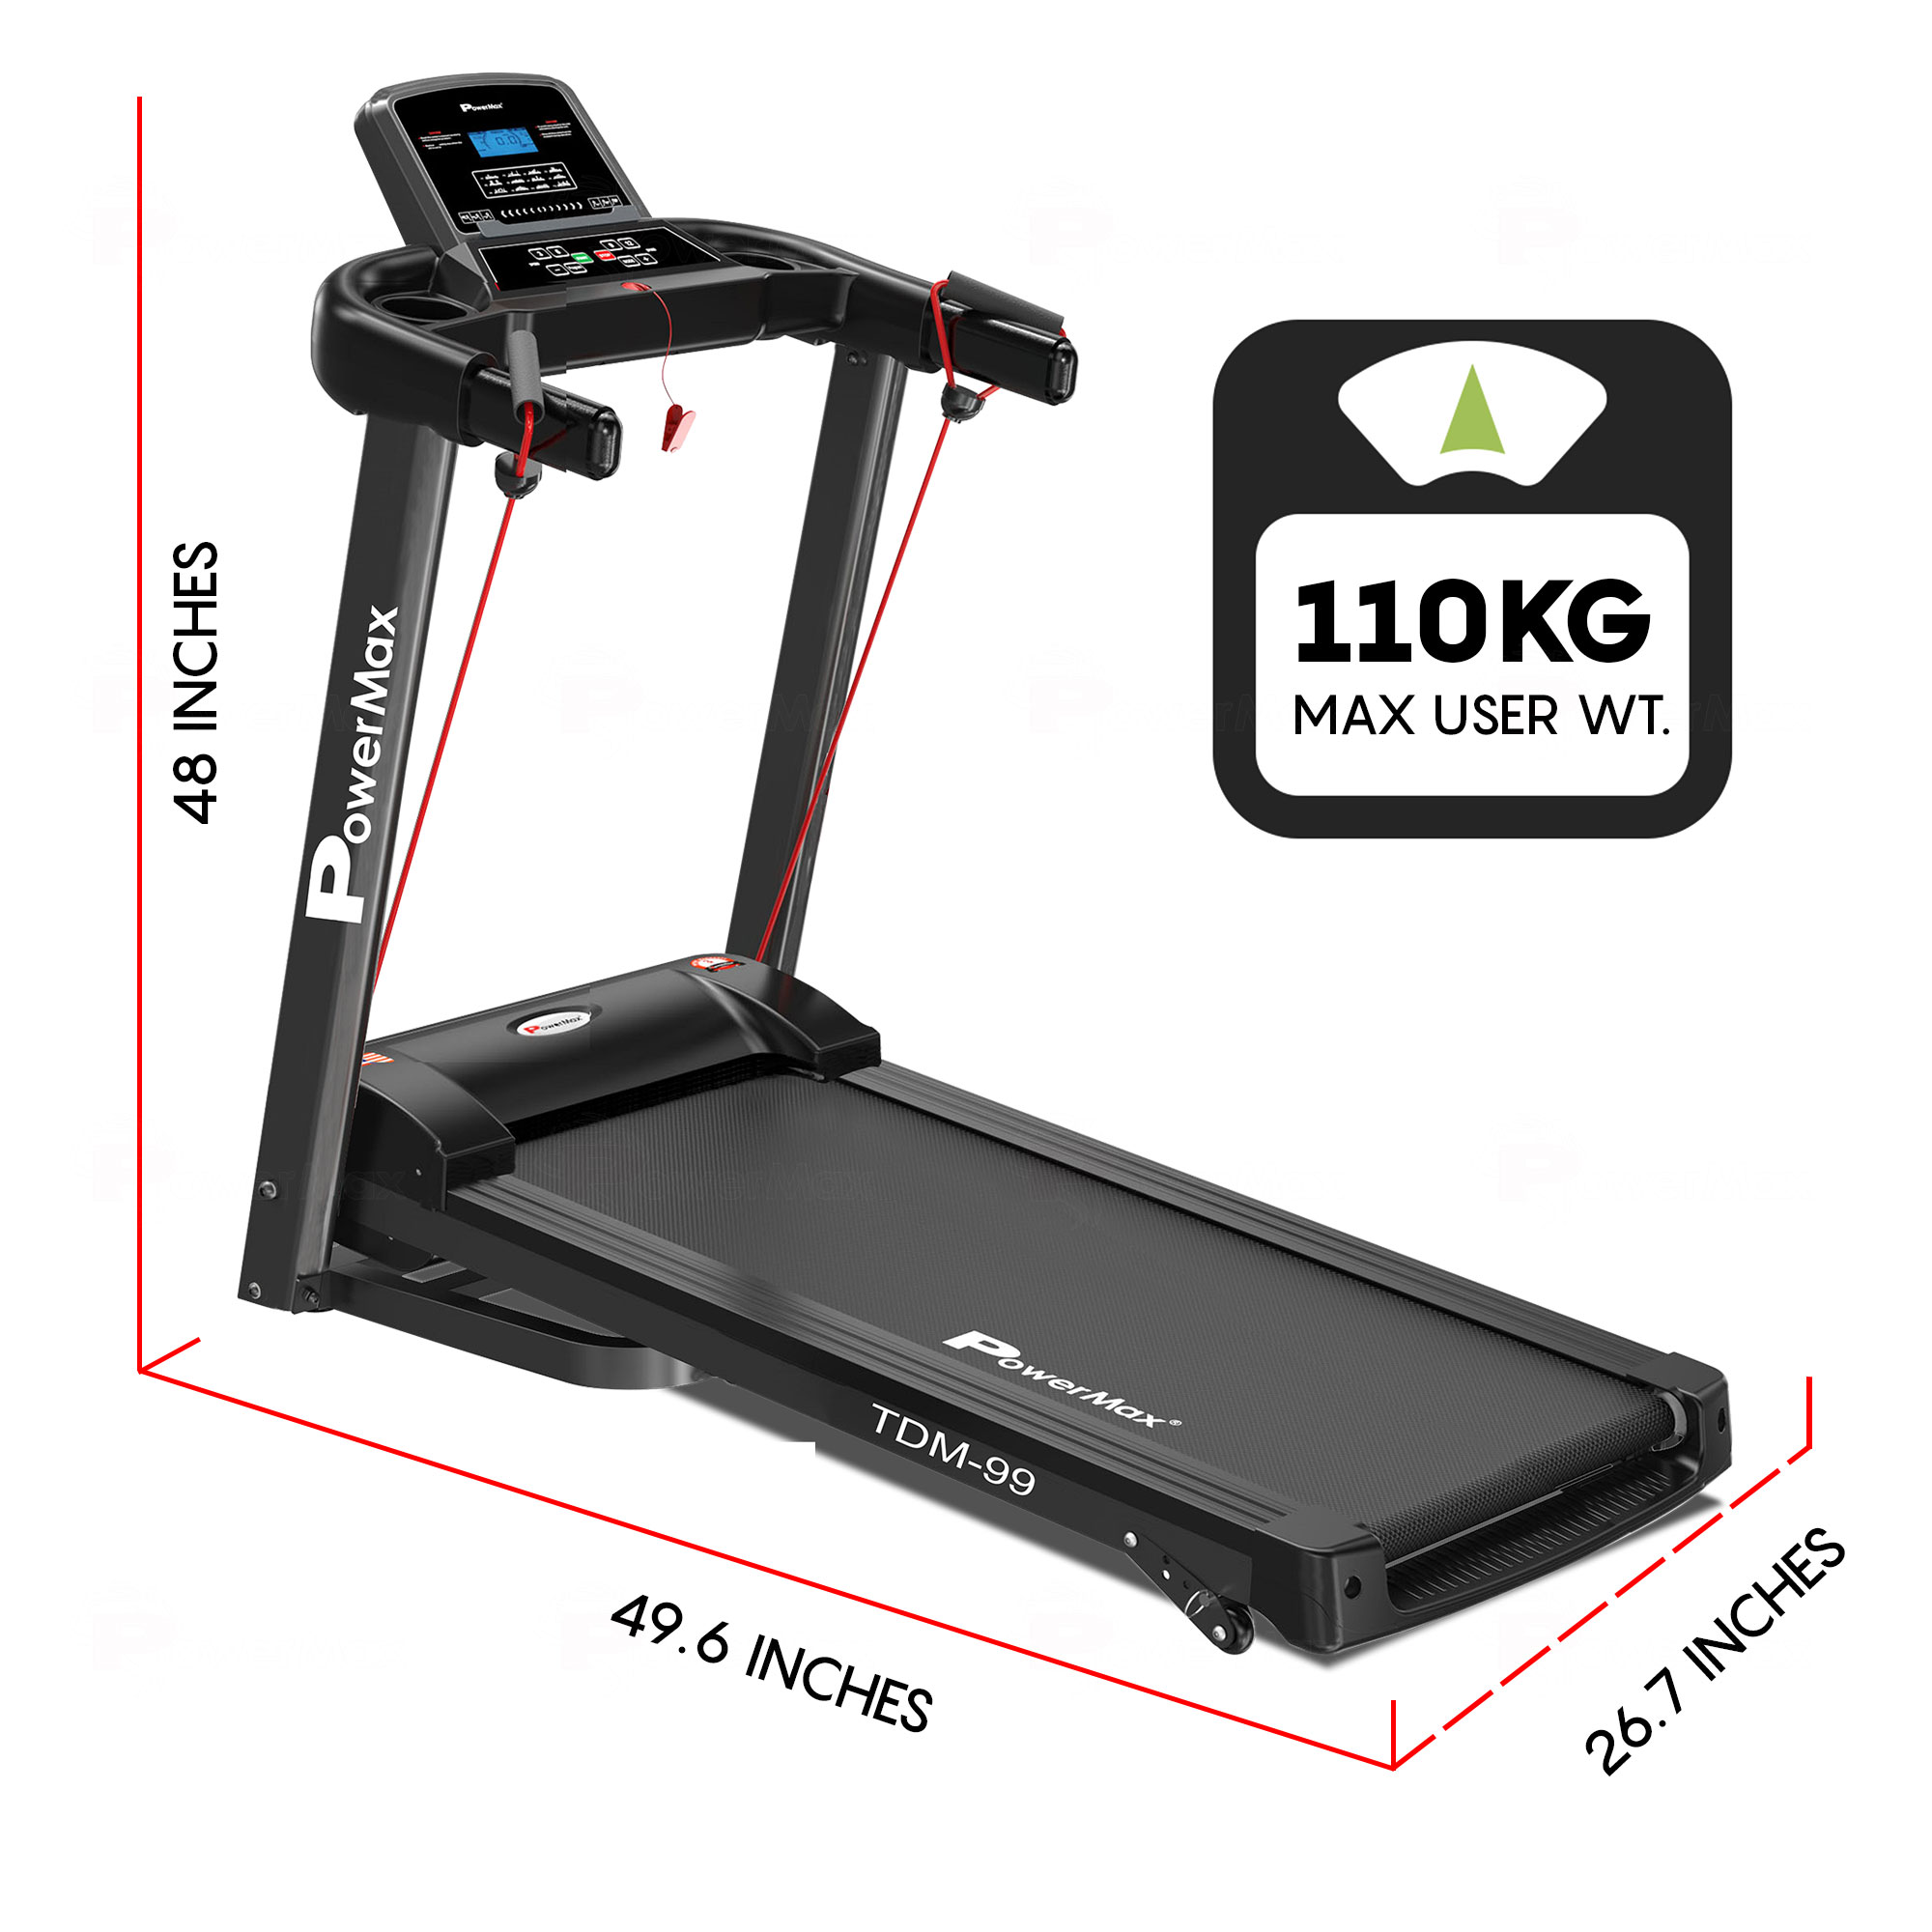 TDM-99 Motorized Treadmill with Twister and Resistance Ropes